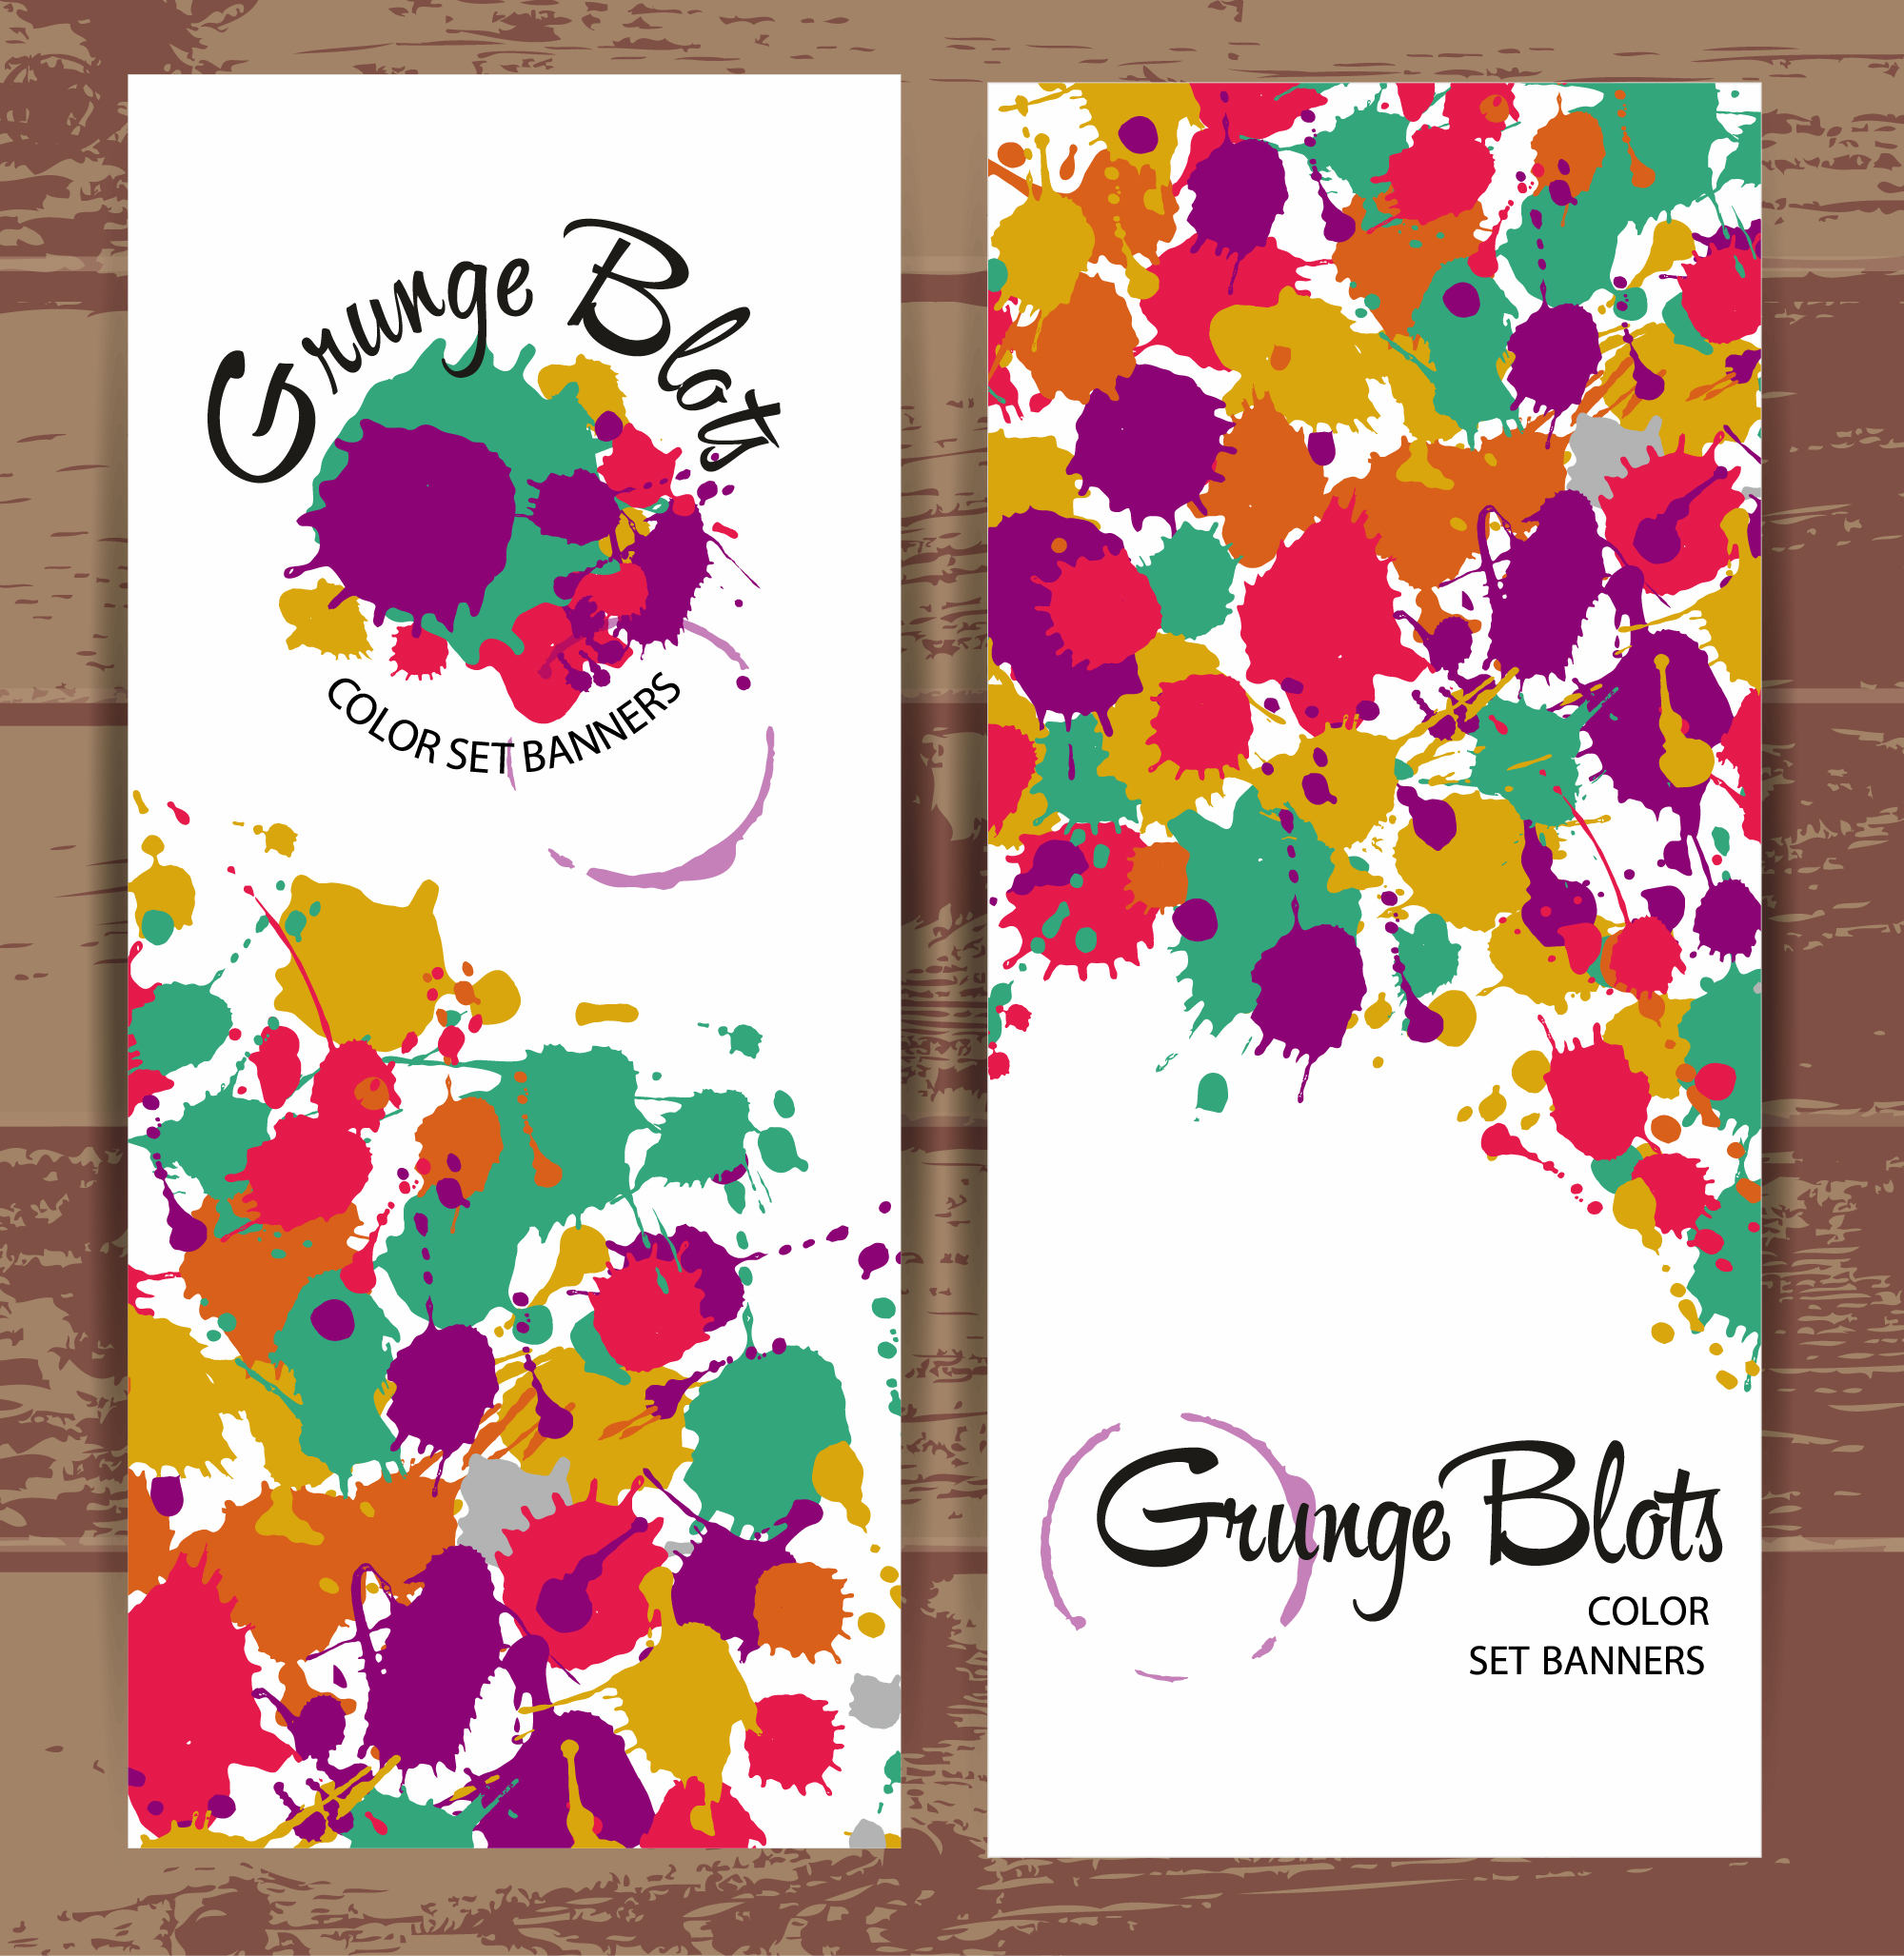 Banners of color blots Photoshop brush